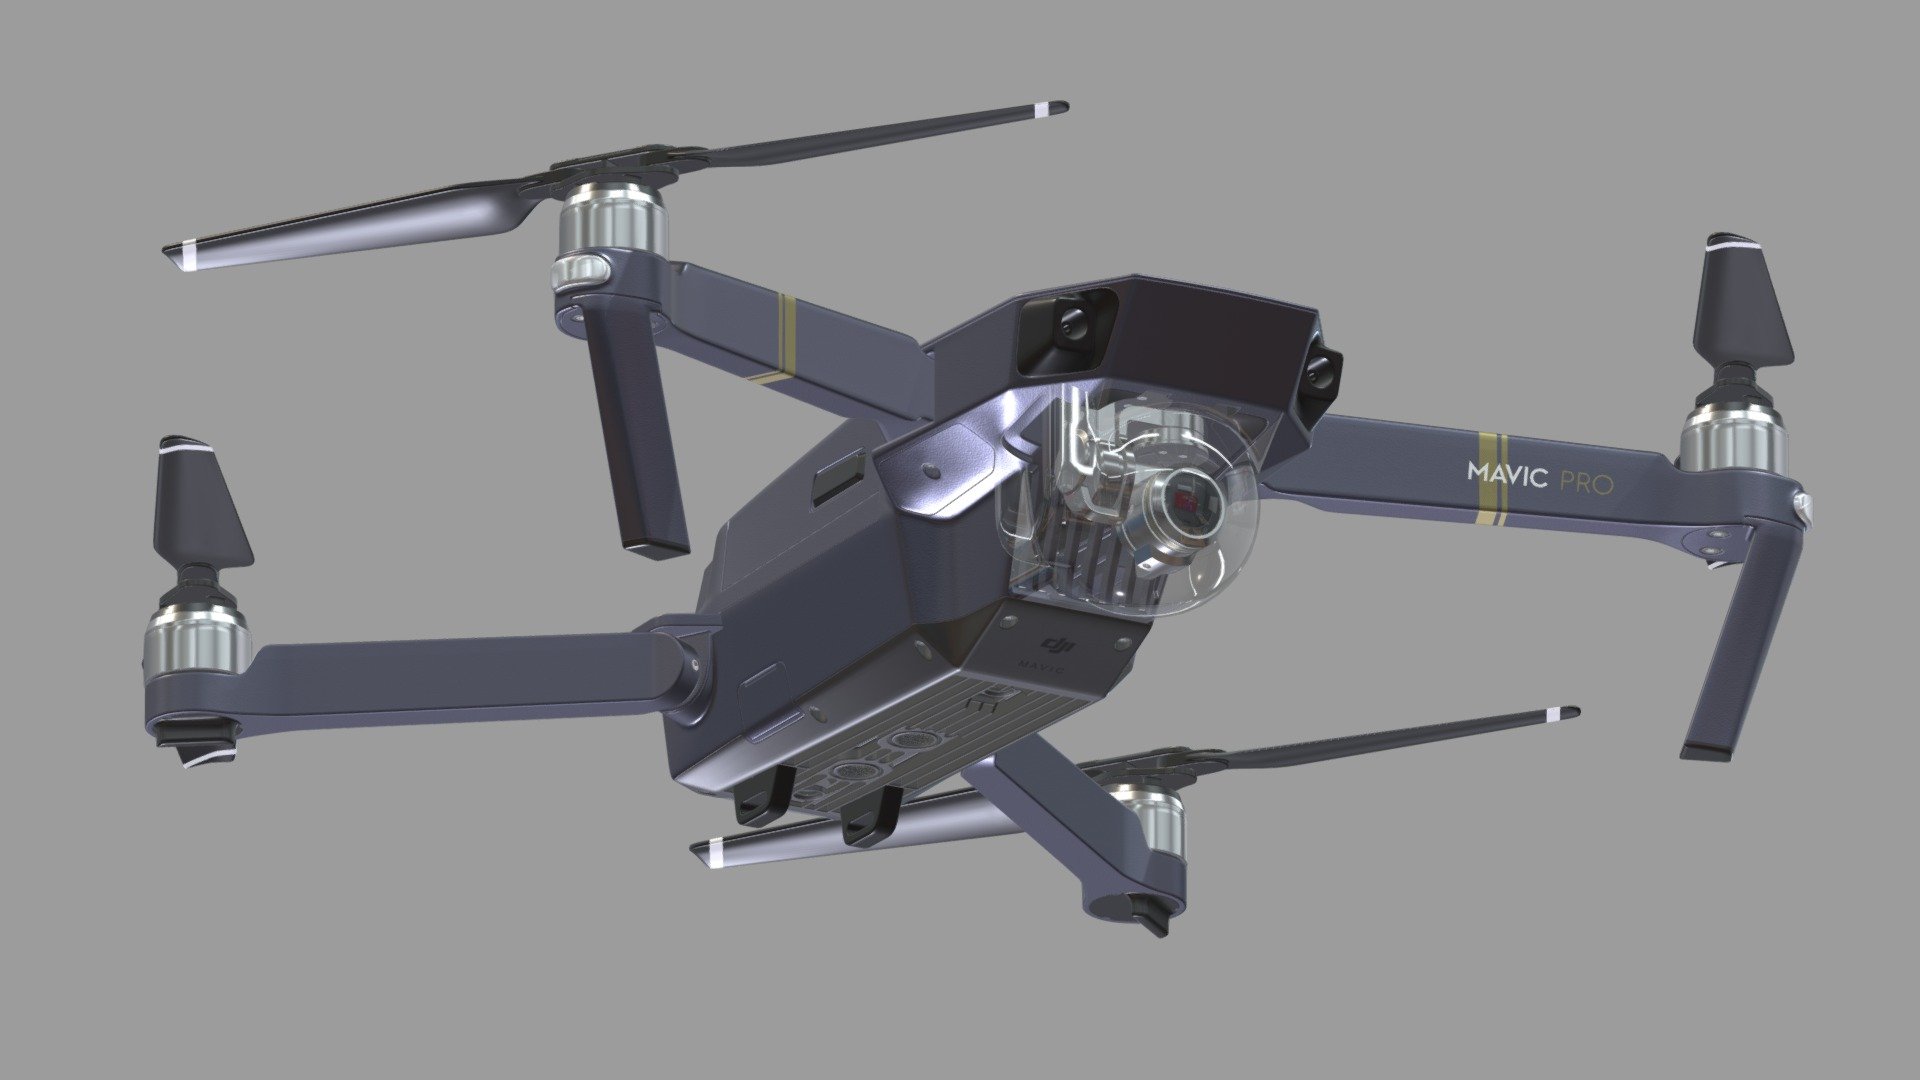 Hi, I'm Frezzy. I am leader of Cgivn studio. We are finished over 3000 projects since 2013.
If you want hire me to do 3d model please touch me at:cgivn.studio Thanks you! - DJI Mavic Pro - Buy Royalty Free 3D model by Frezzy3D 3d model